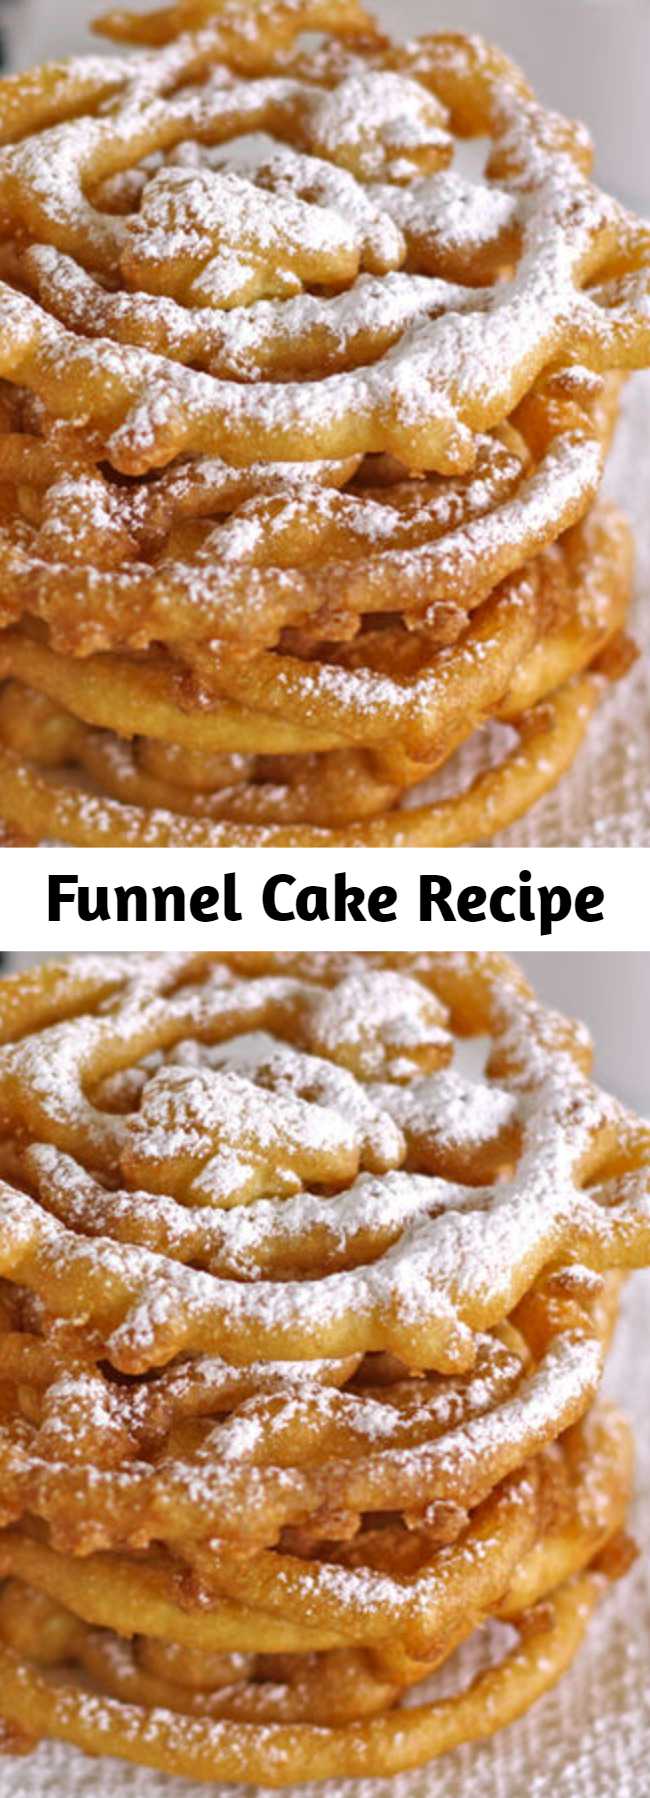 Enjoy the deep-fried funnel cake awesomeness of the state fair all year round with this DIY recipe.